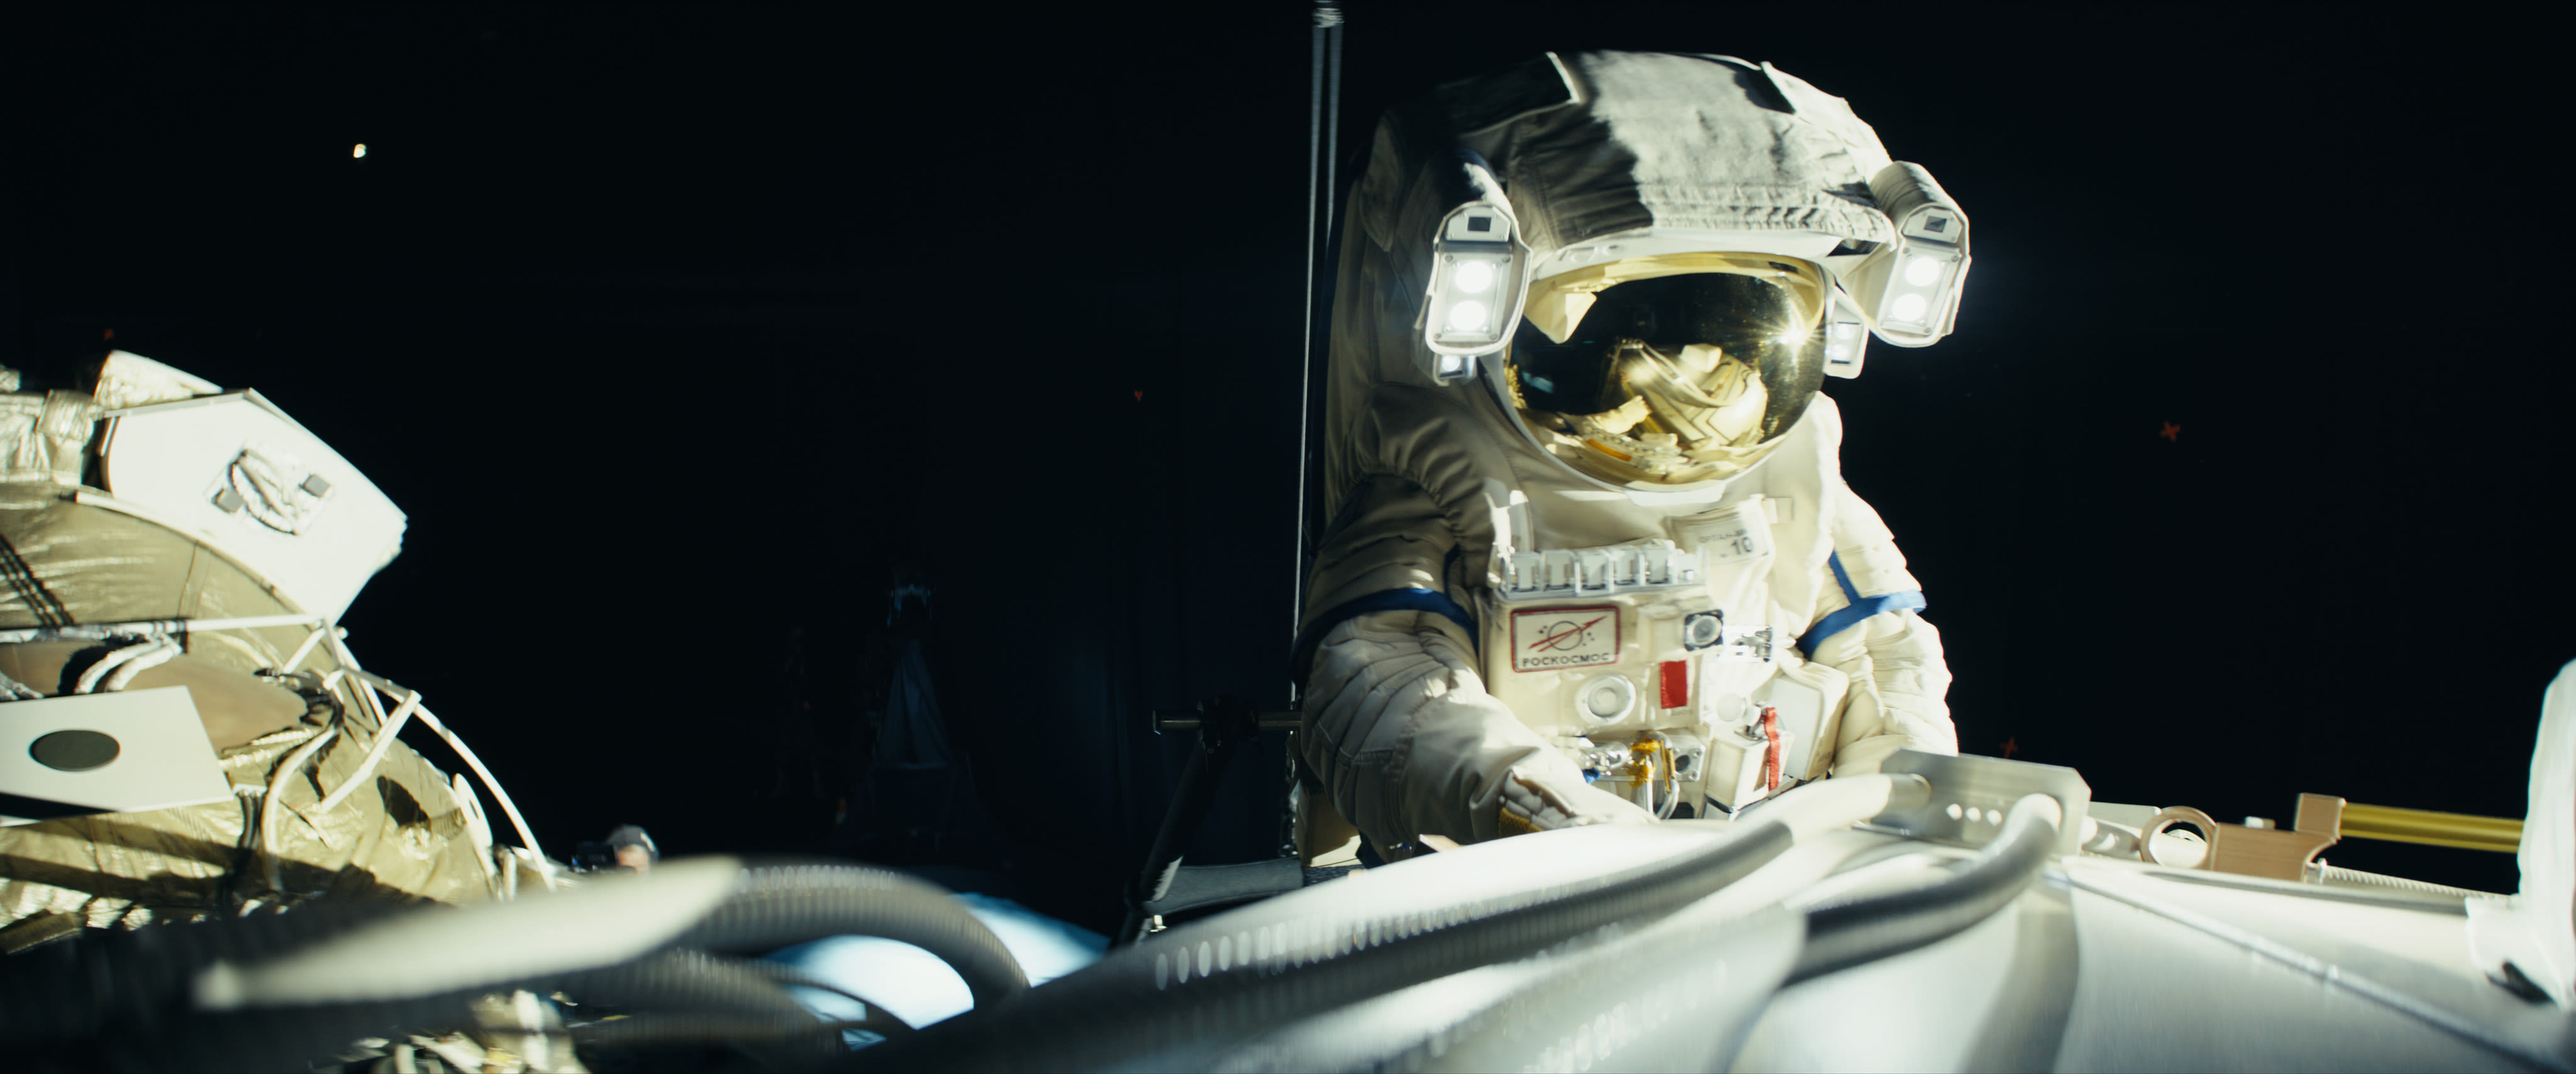 How Apple TV+ Space Series ‘Constellation’ Pulled Off Those Zero Gravity Scenes